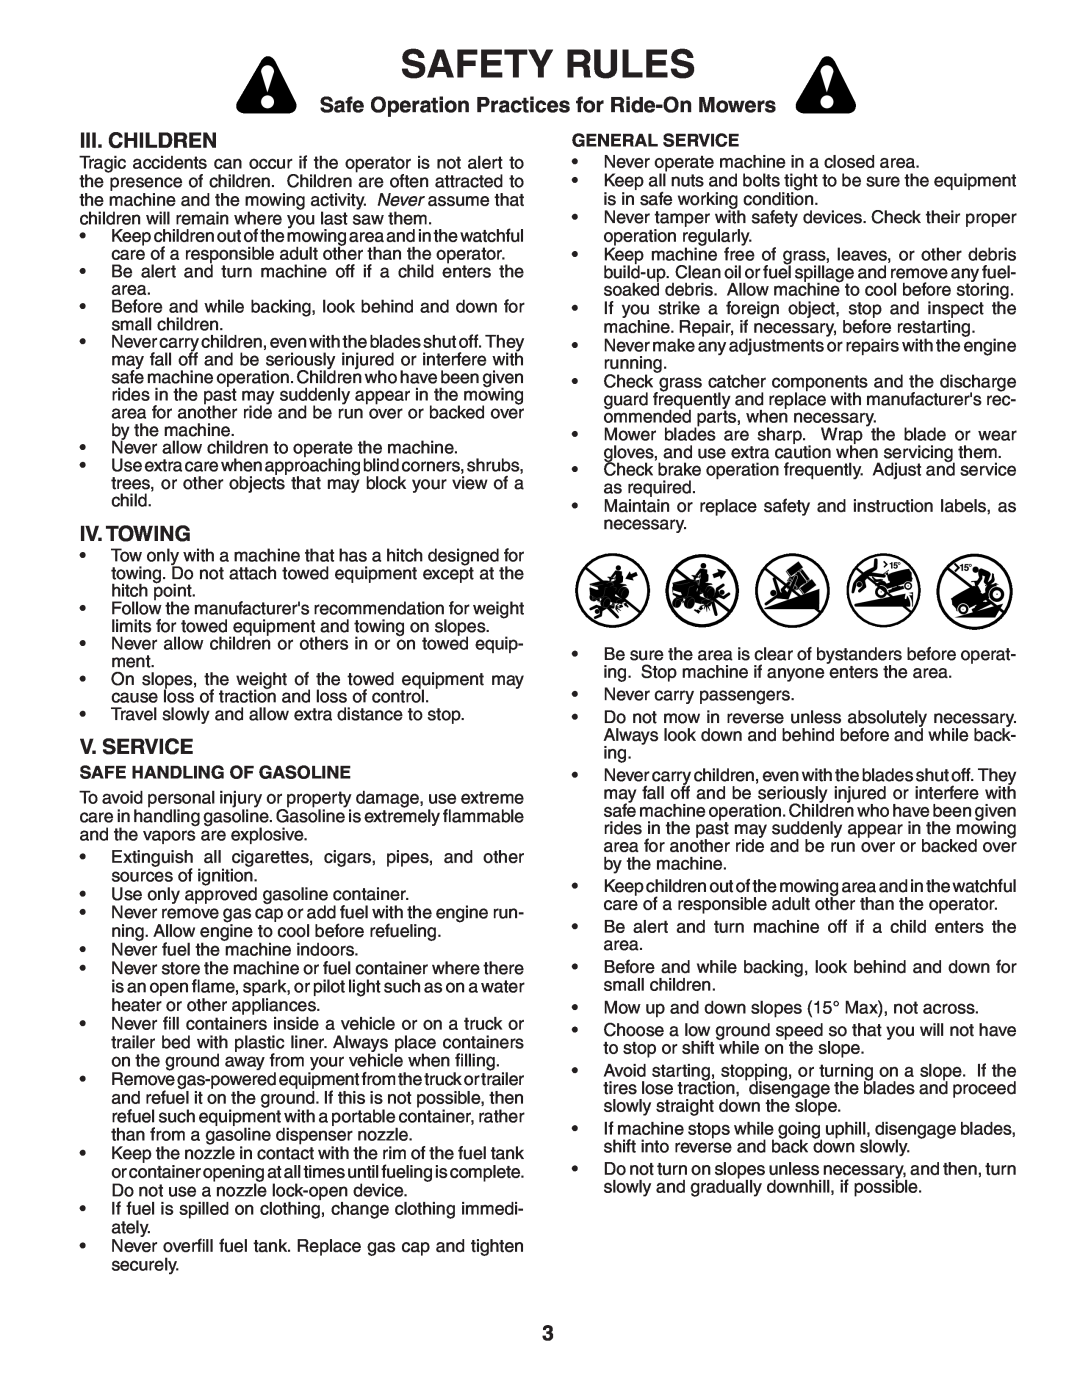 Poulan XT22H48YT manual Iii. Children, Iv. Towing, V. Service, Safety Rules, Safe Operation Practices for Ride-On Mowers 